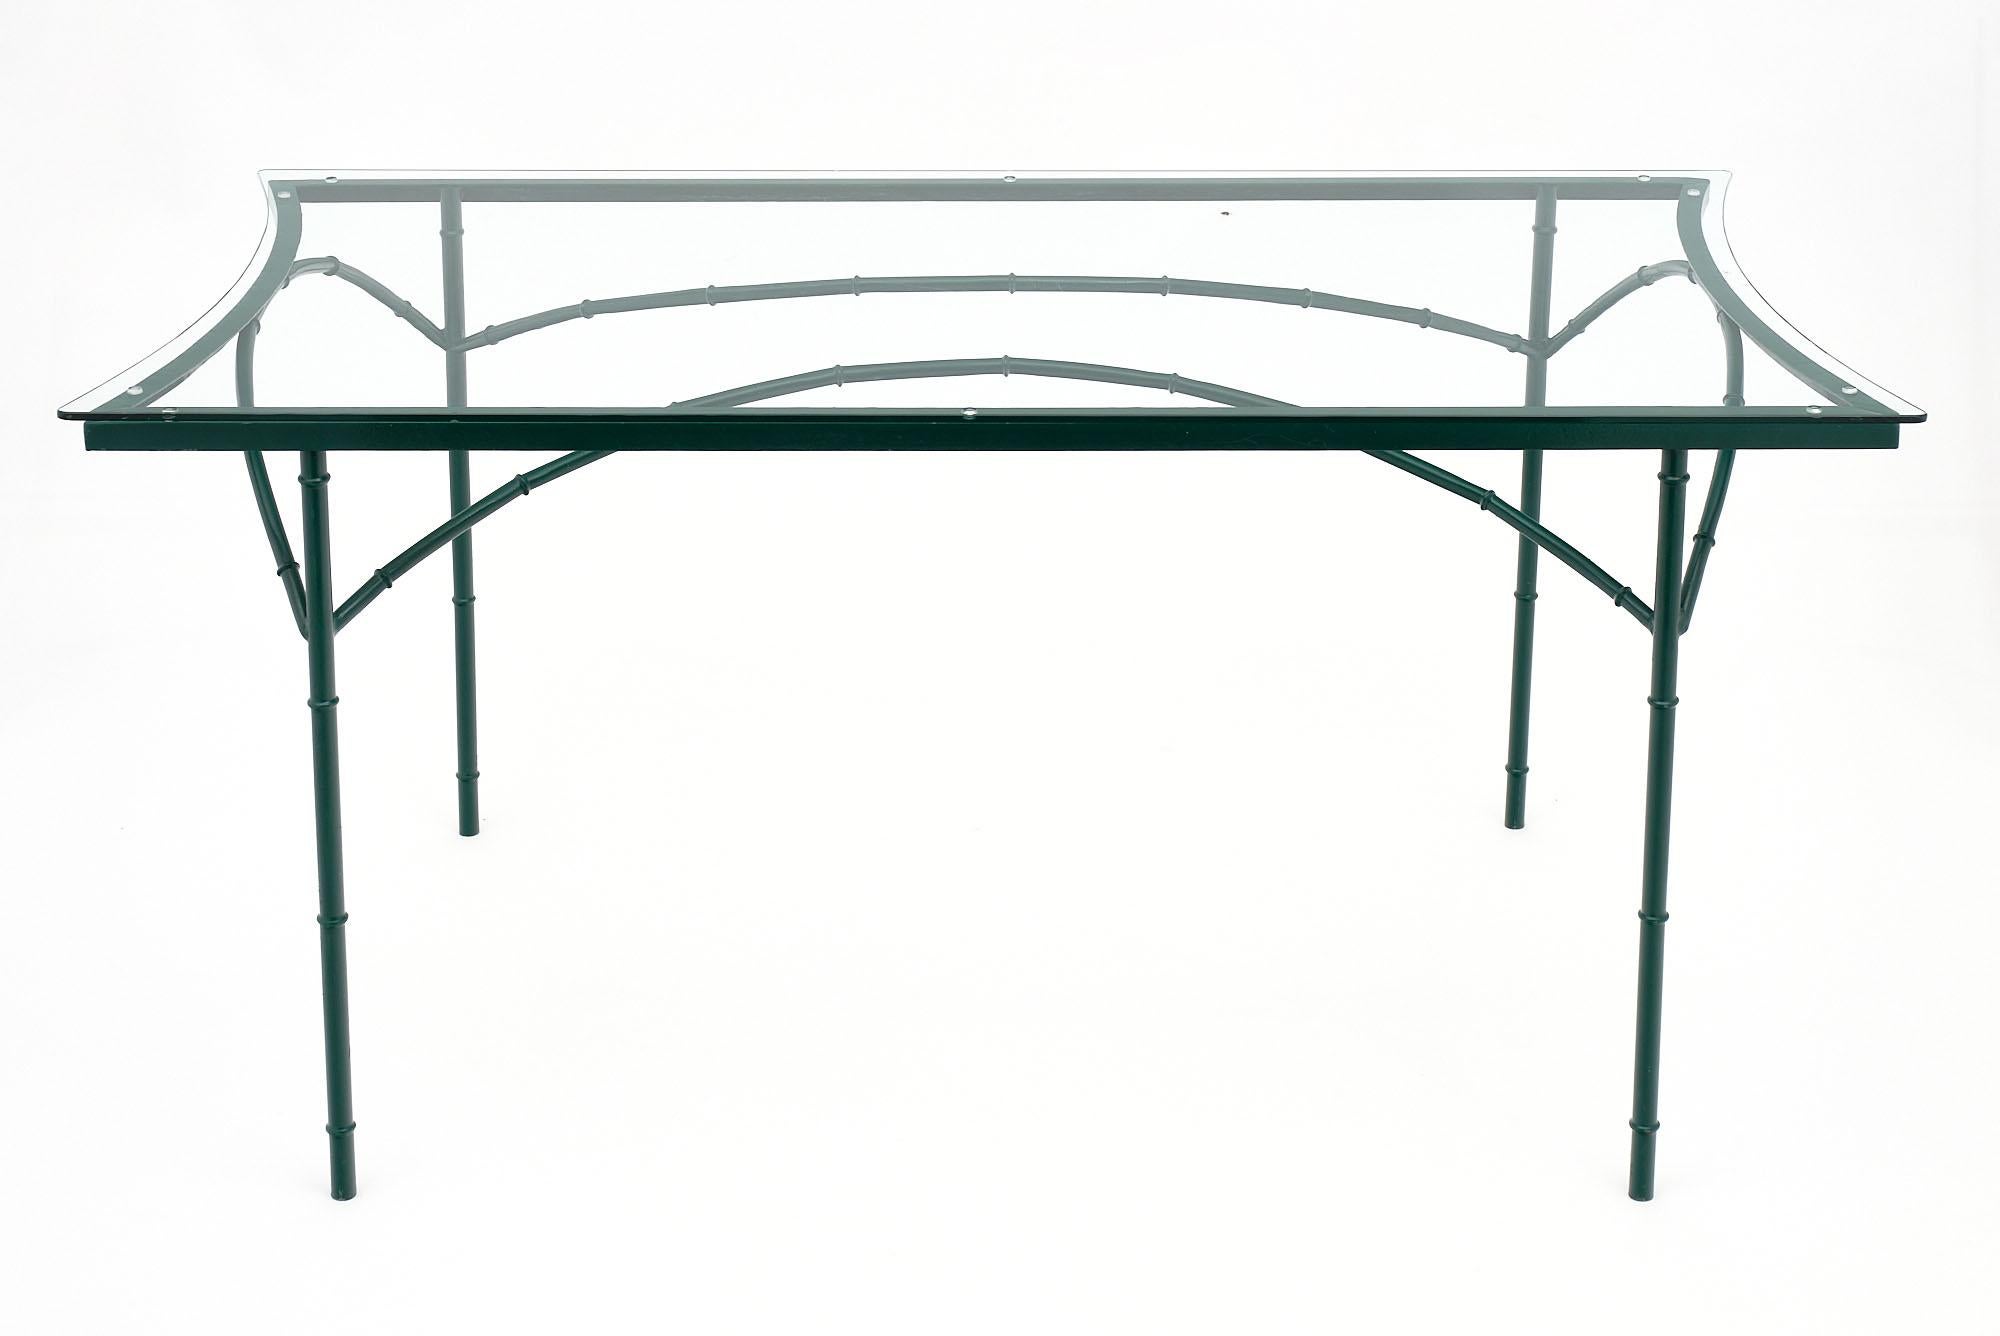 French vintage garden dining room table attributed to Maison Jansen. The structure is stylized bambou steel frame in a green tone with a curved original glass top. Some surface wear to the glass.